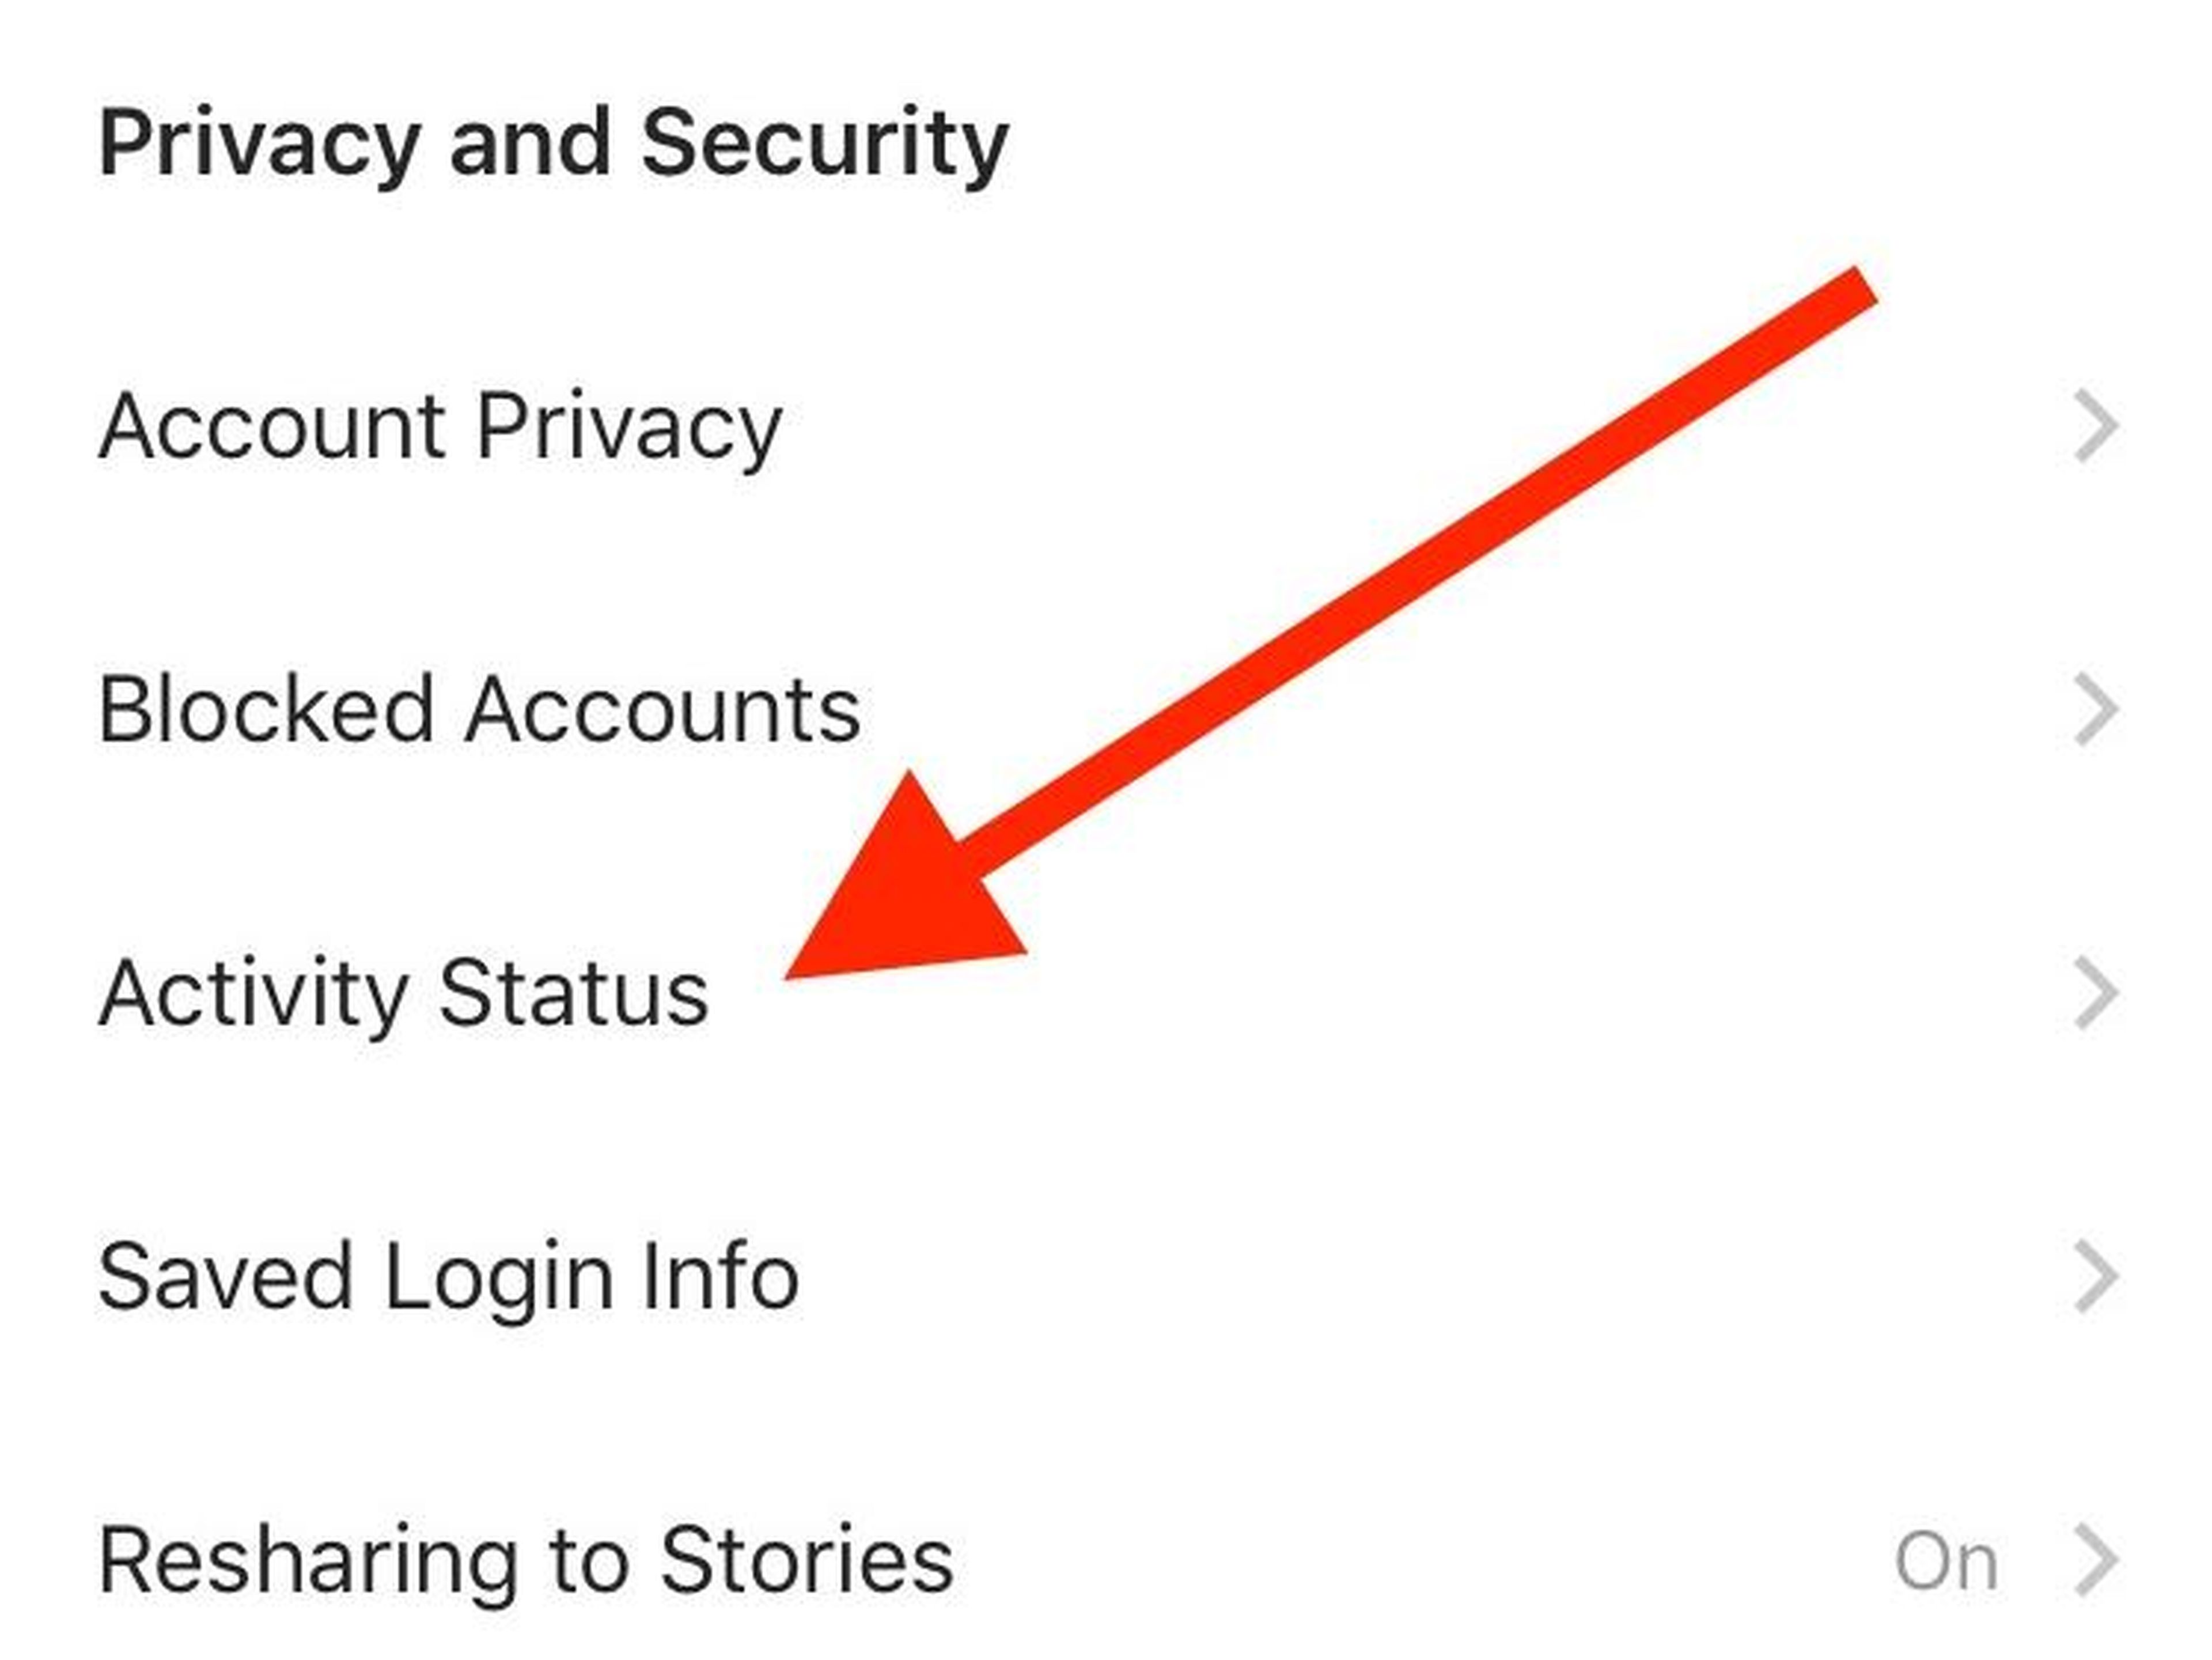 Scroll down to the Privacy and Security section, and go into the Activity Status menu.